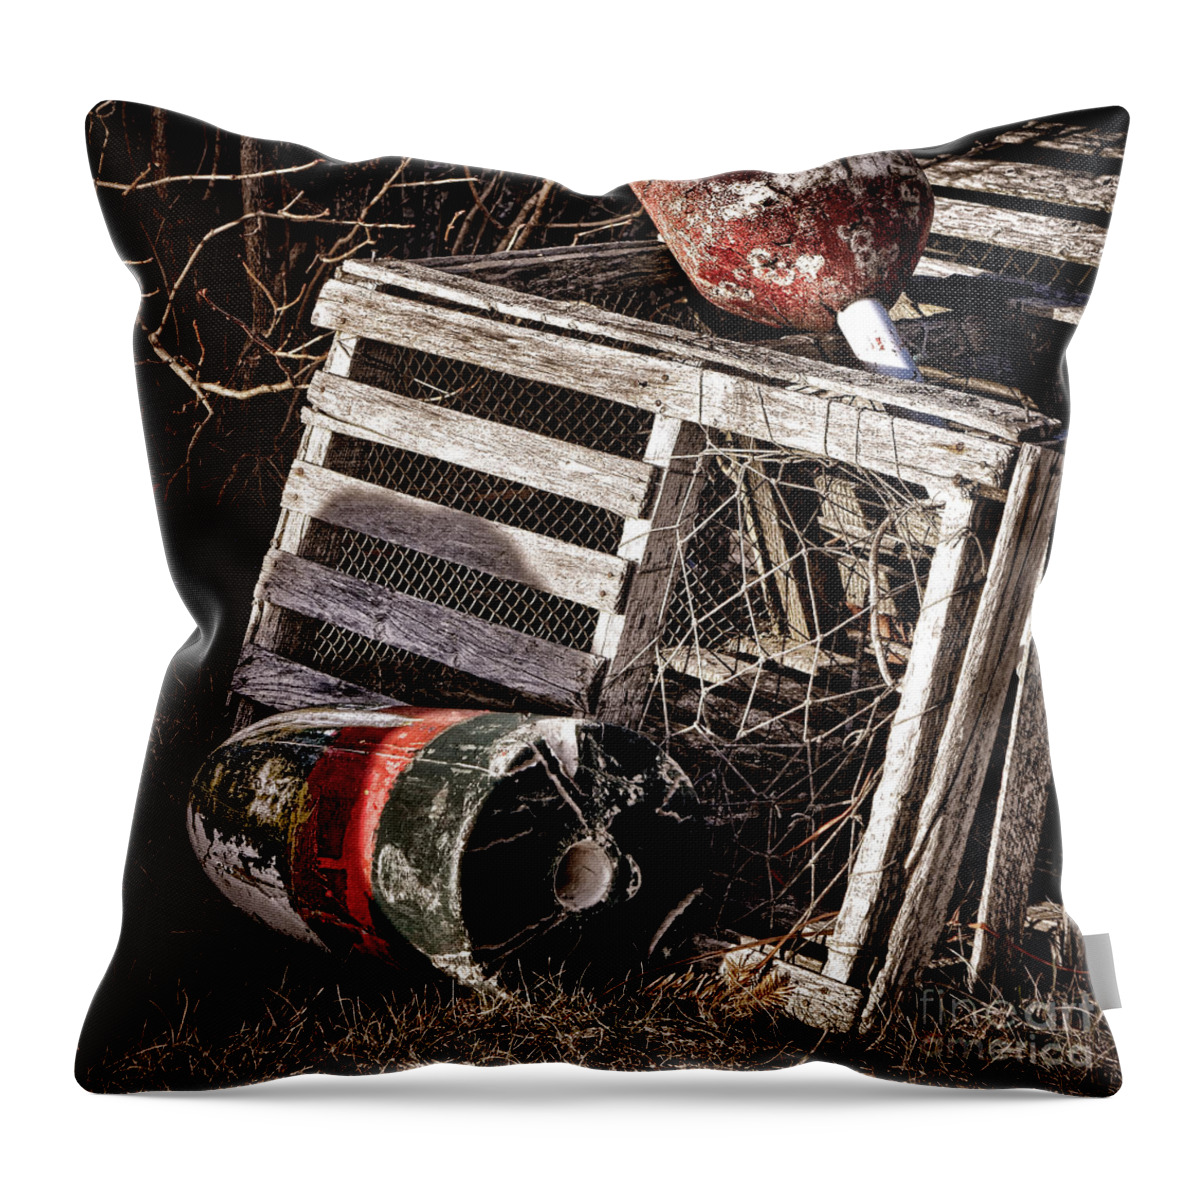 Lobster Throw Pillow featuring the photograph Antique Maine Lobster Trap by Olivier Le Queinec